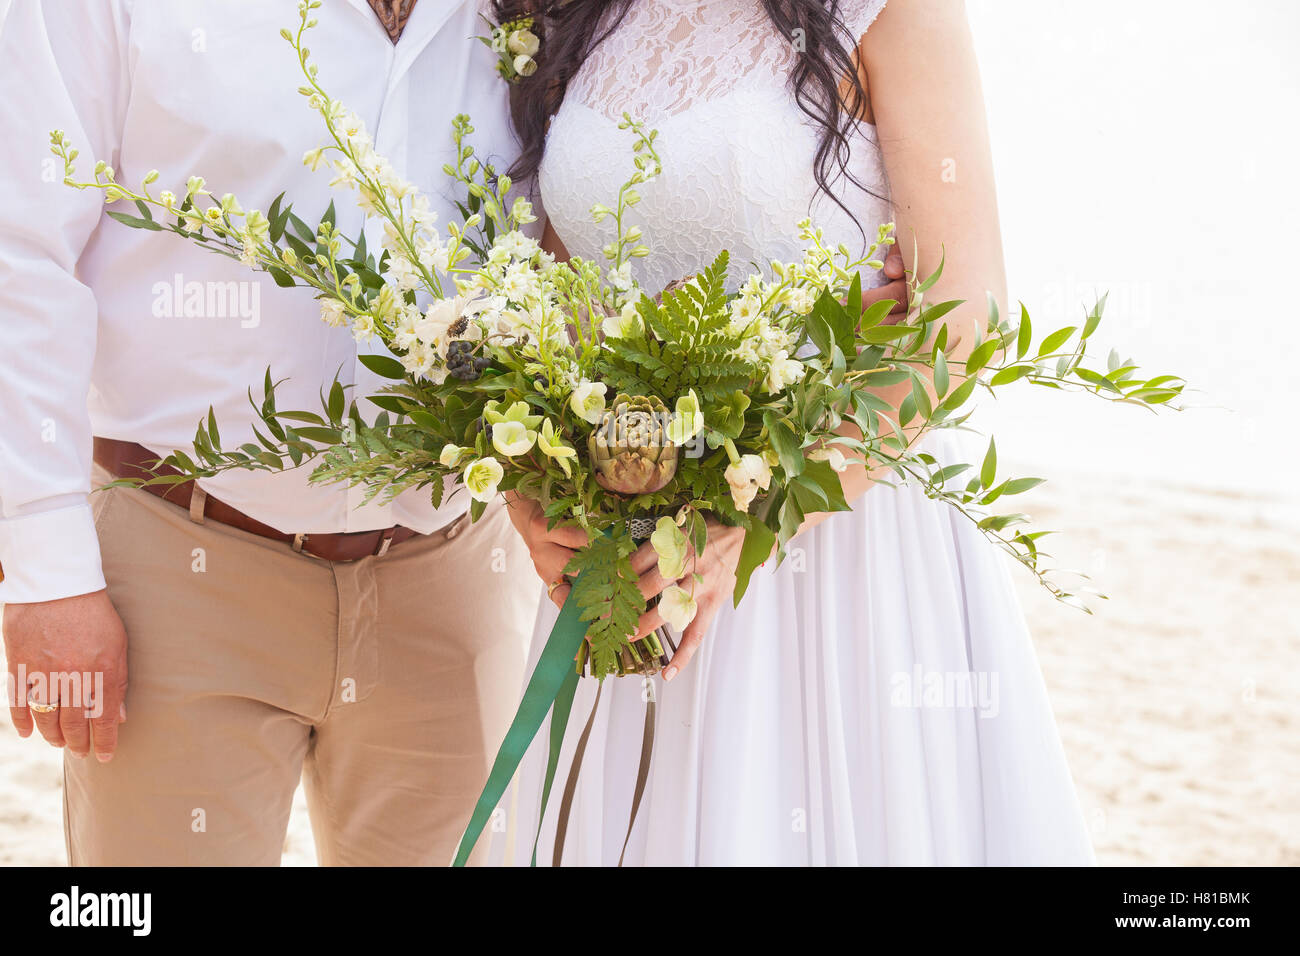 a wedding bouquet is in the hands of fiancee Stock Photo